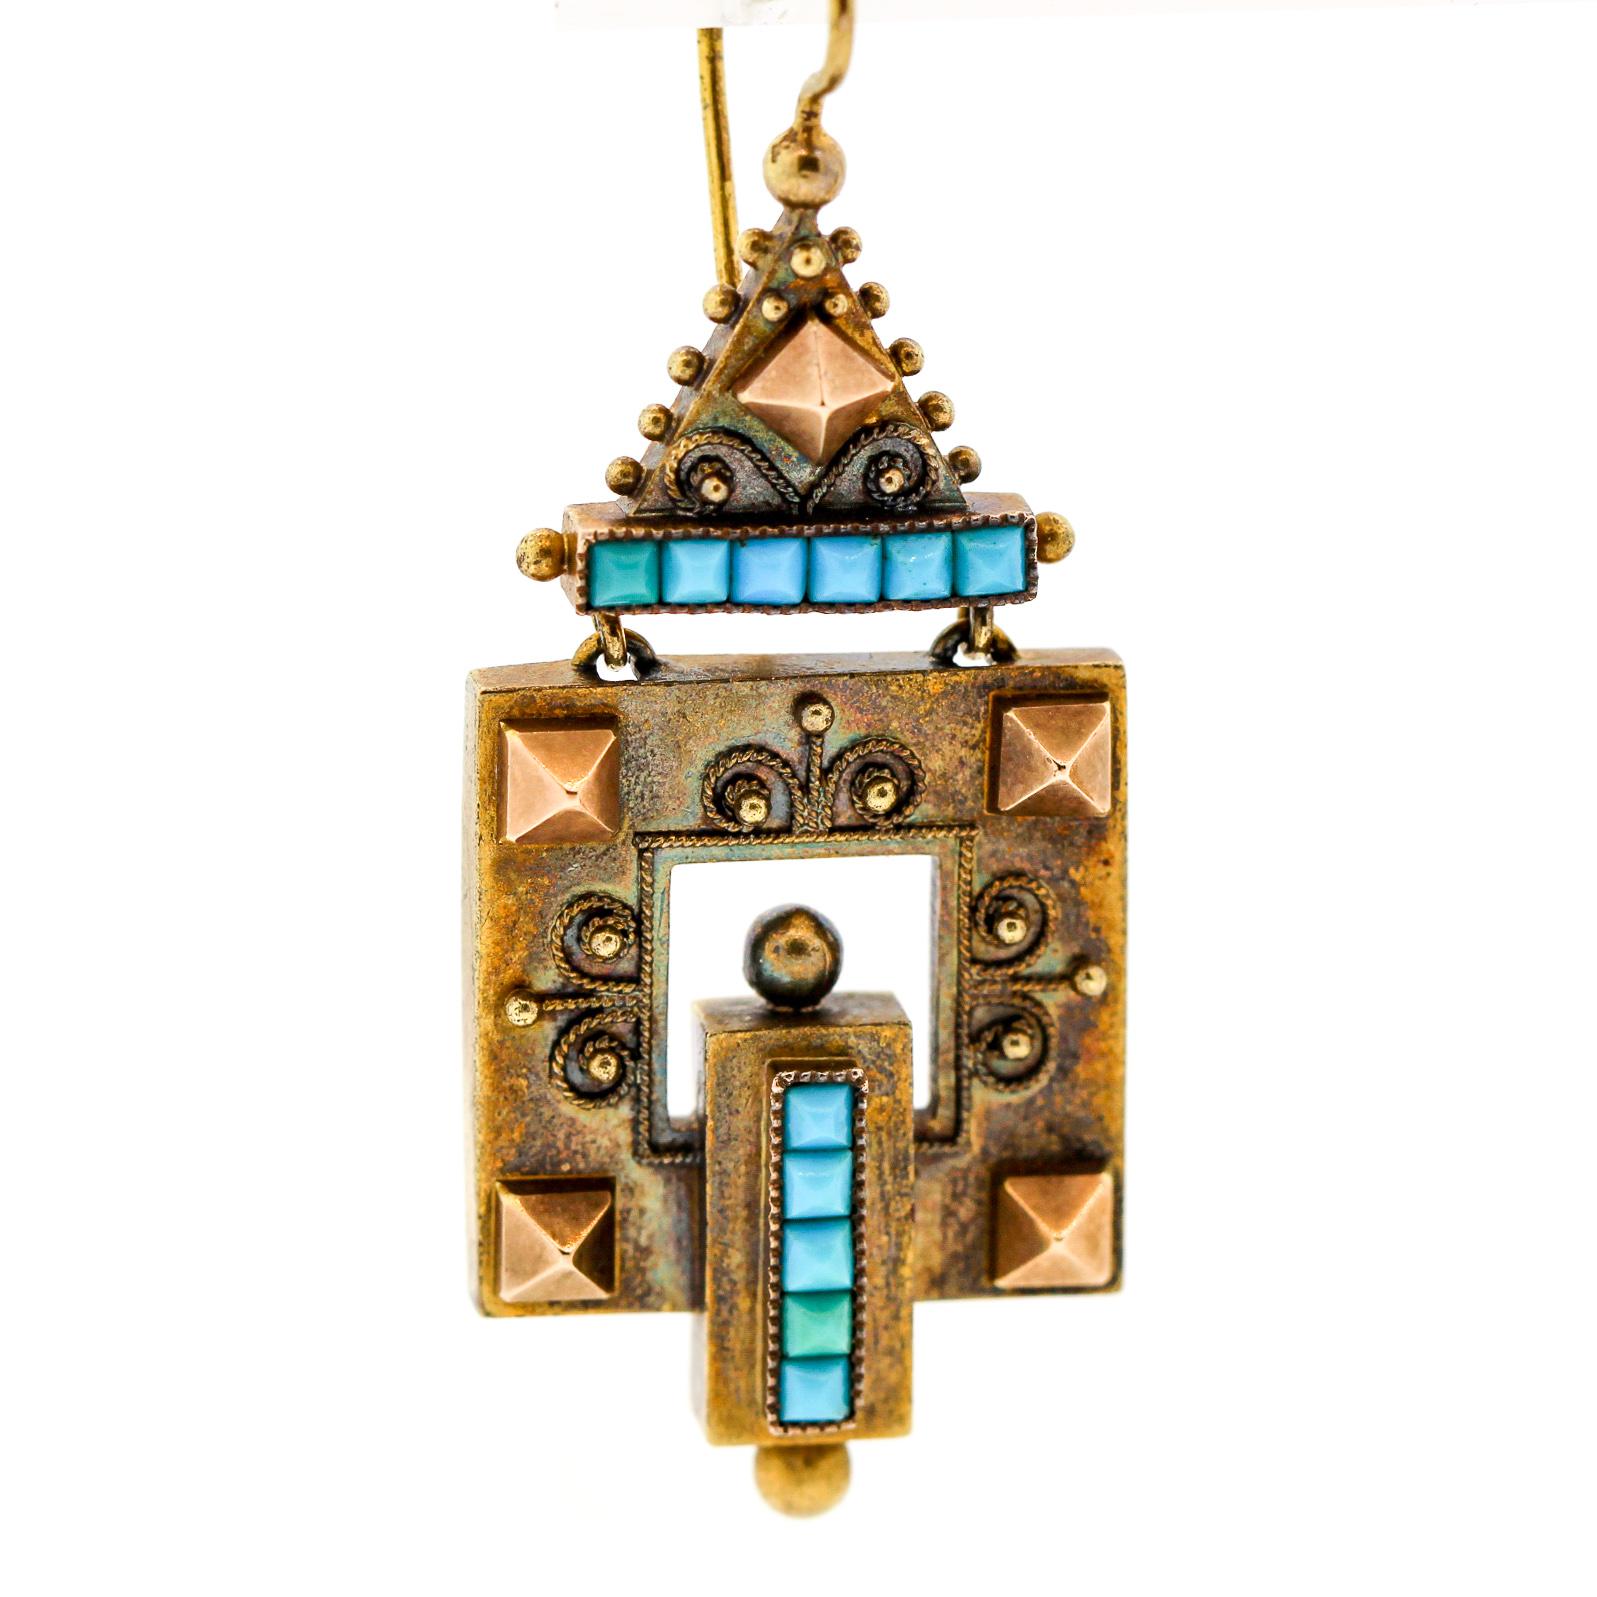 A pair of antique Victorian 14k yellow gold and buff top turquoise geometric pendant earrings. These earrings are wonderfully modern in feel with gold canetille work and rivet like details. The buff top turquoise is a marvel to behold. The earrings